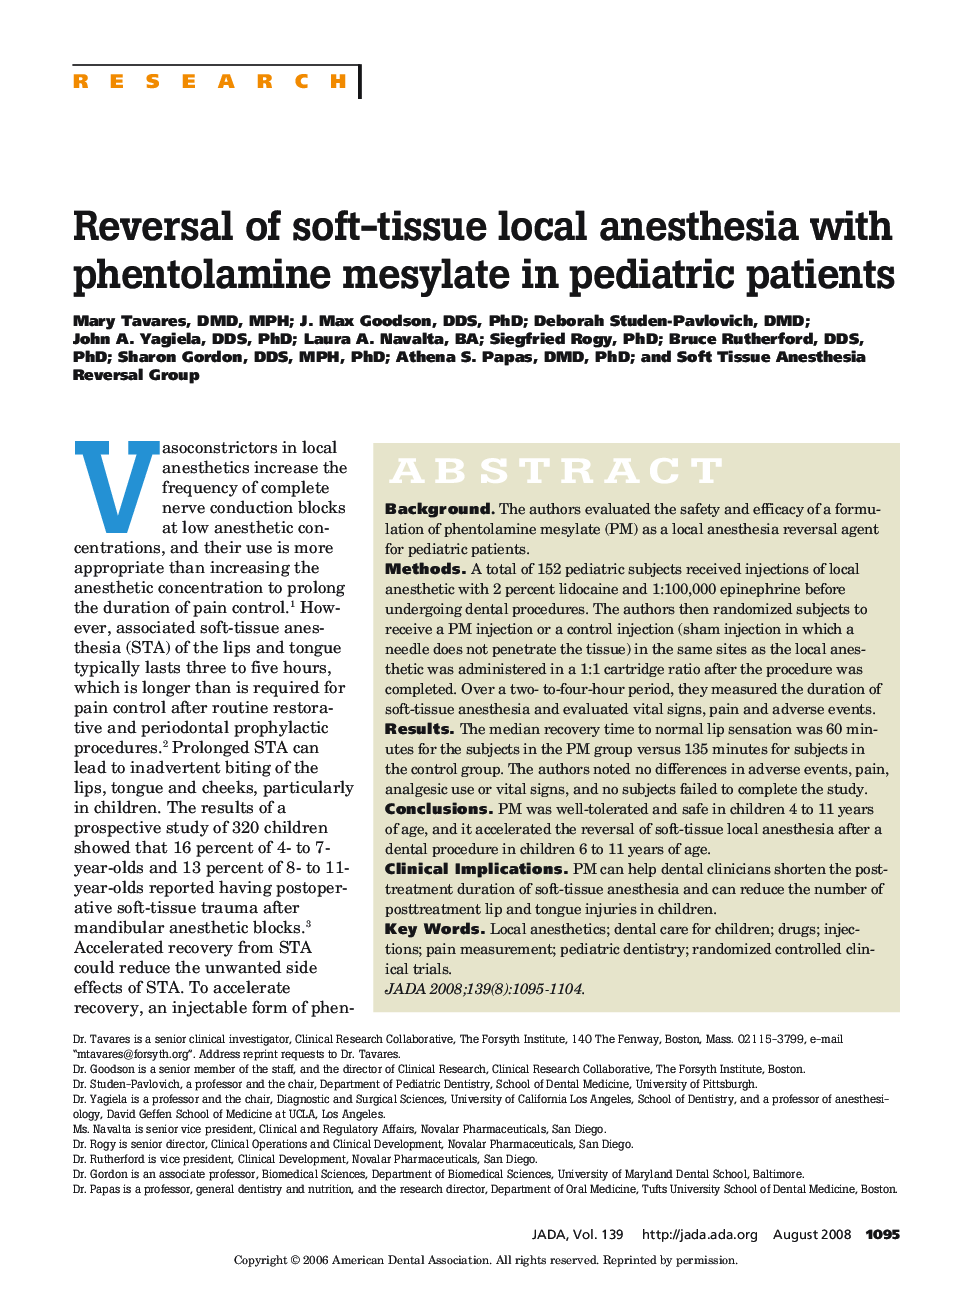 Reversal of Soft-Tissue Local Anesthesia With Phentolamine Mesylate in Pediatric Patients